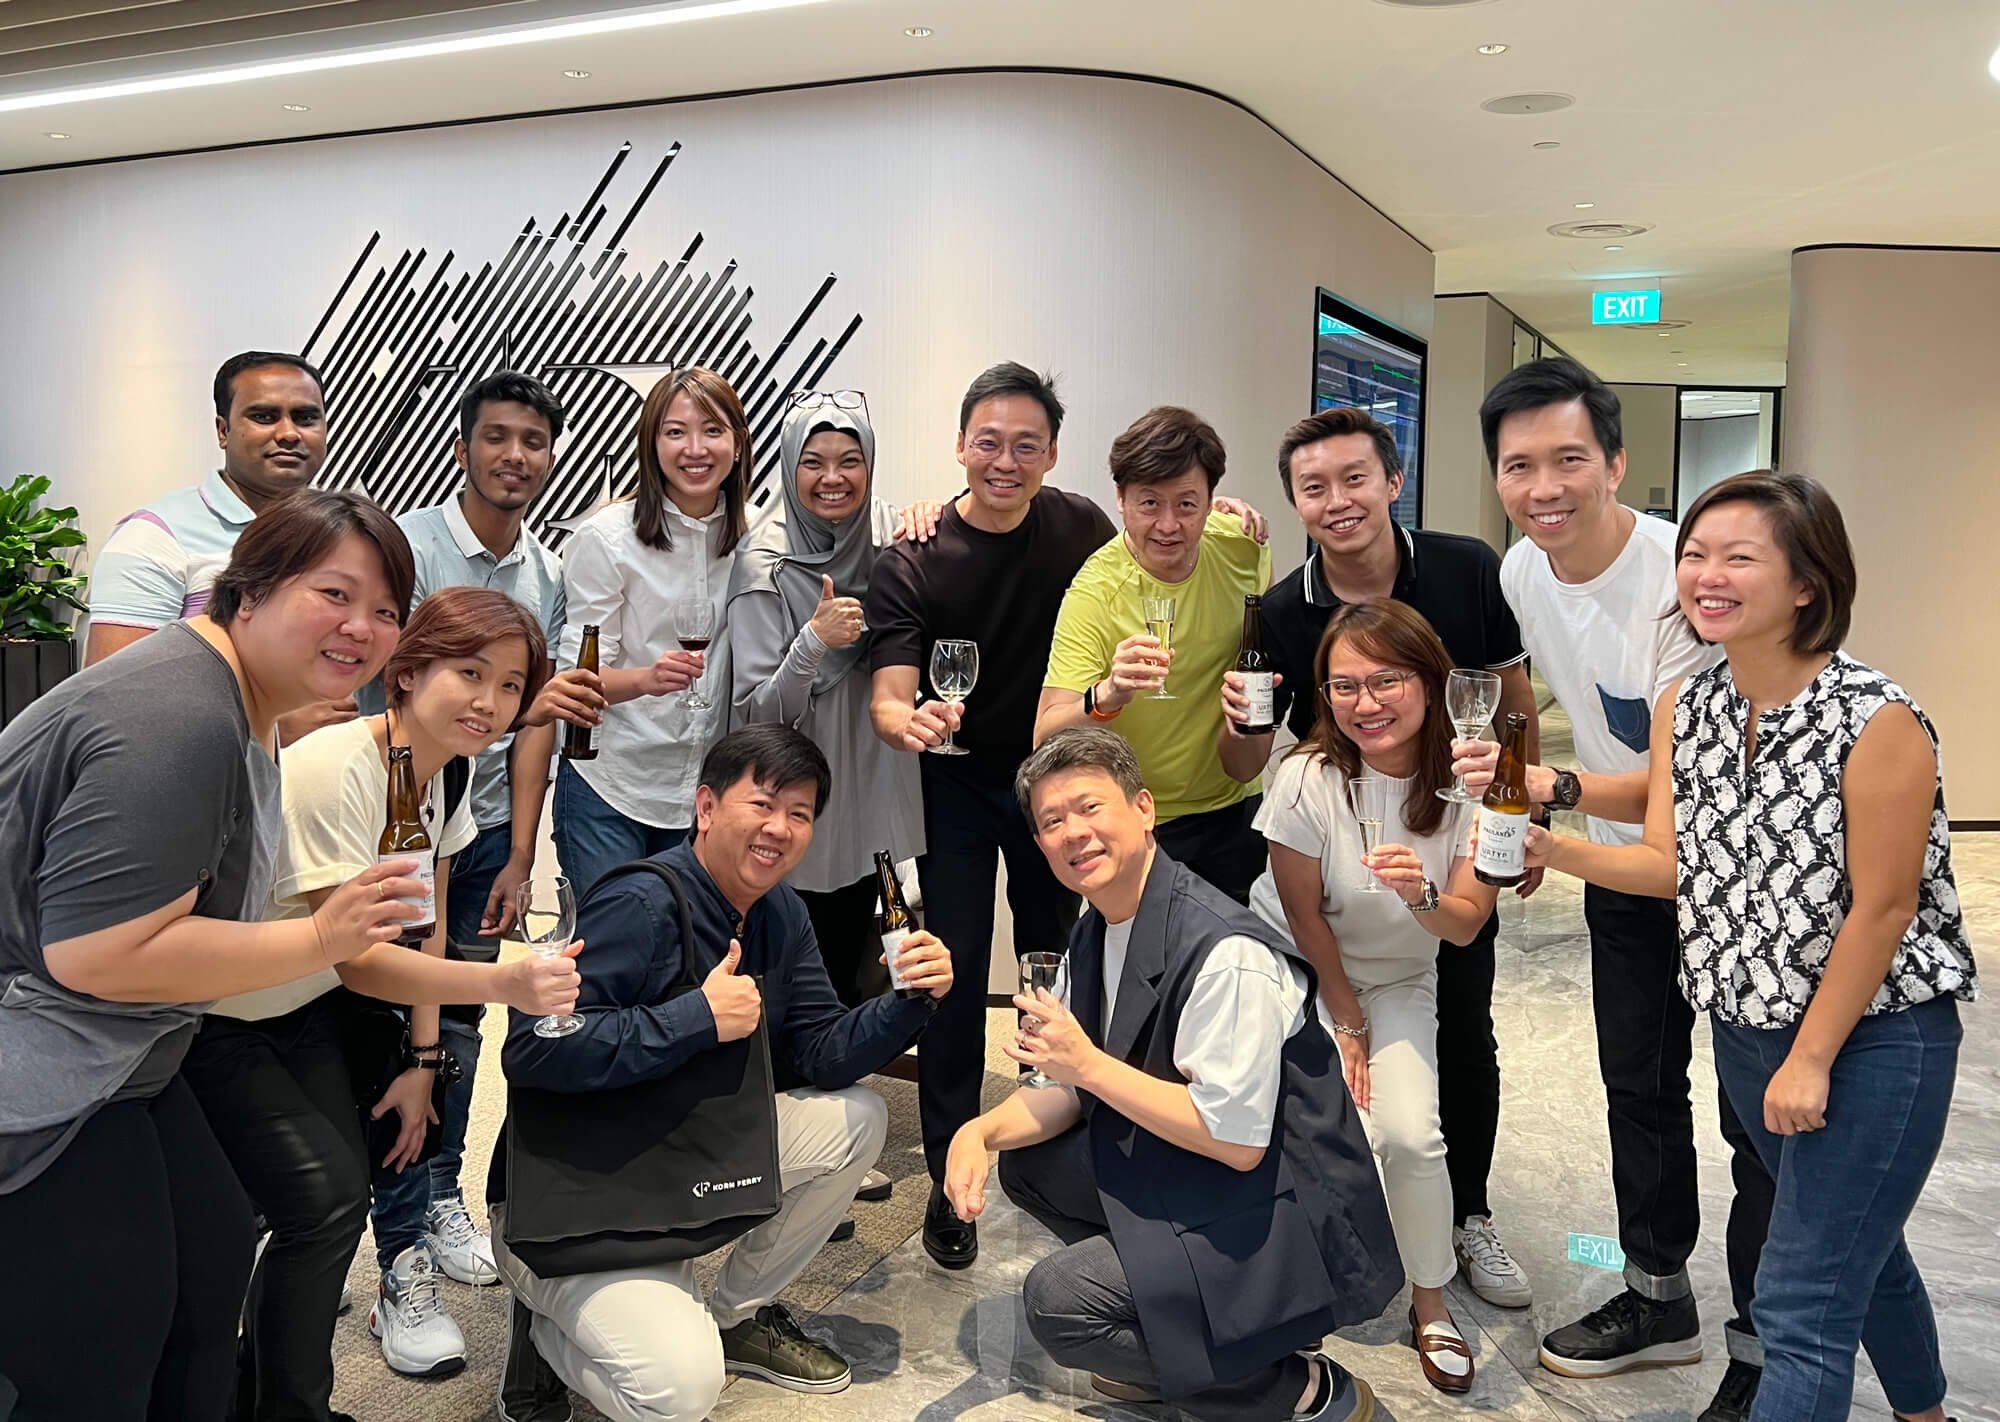  The Conexus Studio and Korn Ferry teams toasting to the project at the Fridays at Five event 